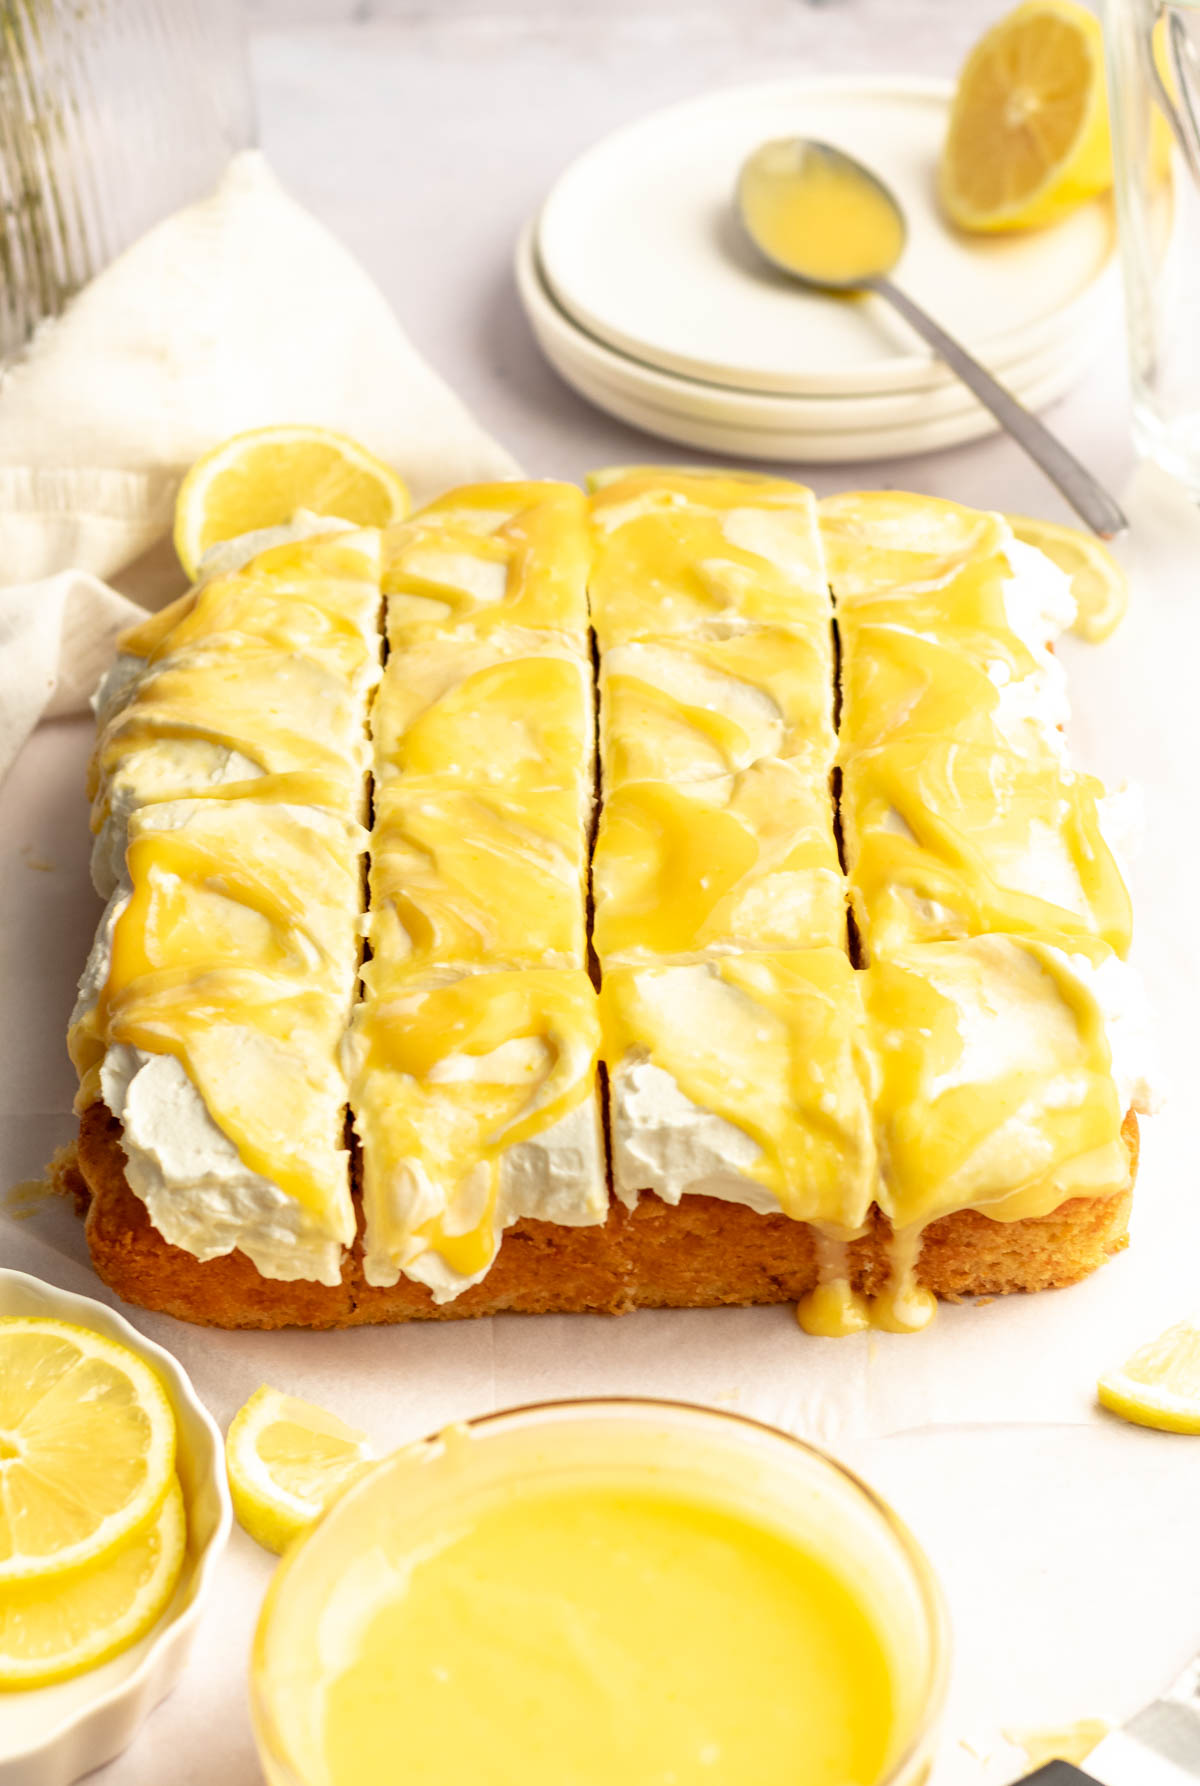 Limoncello cake with lemon curd on top.